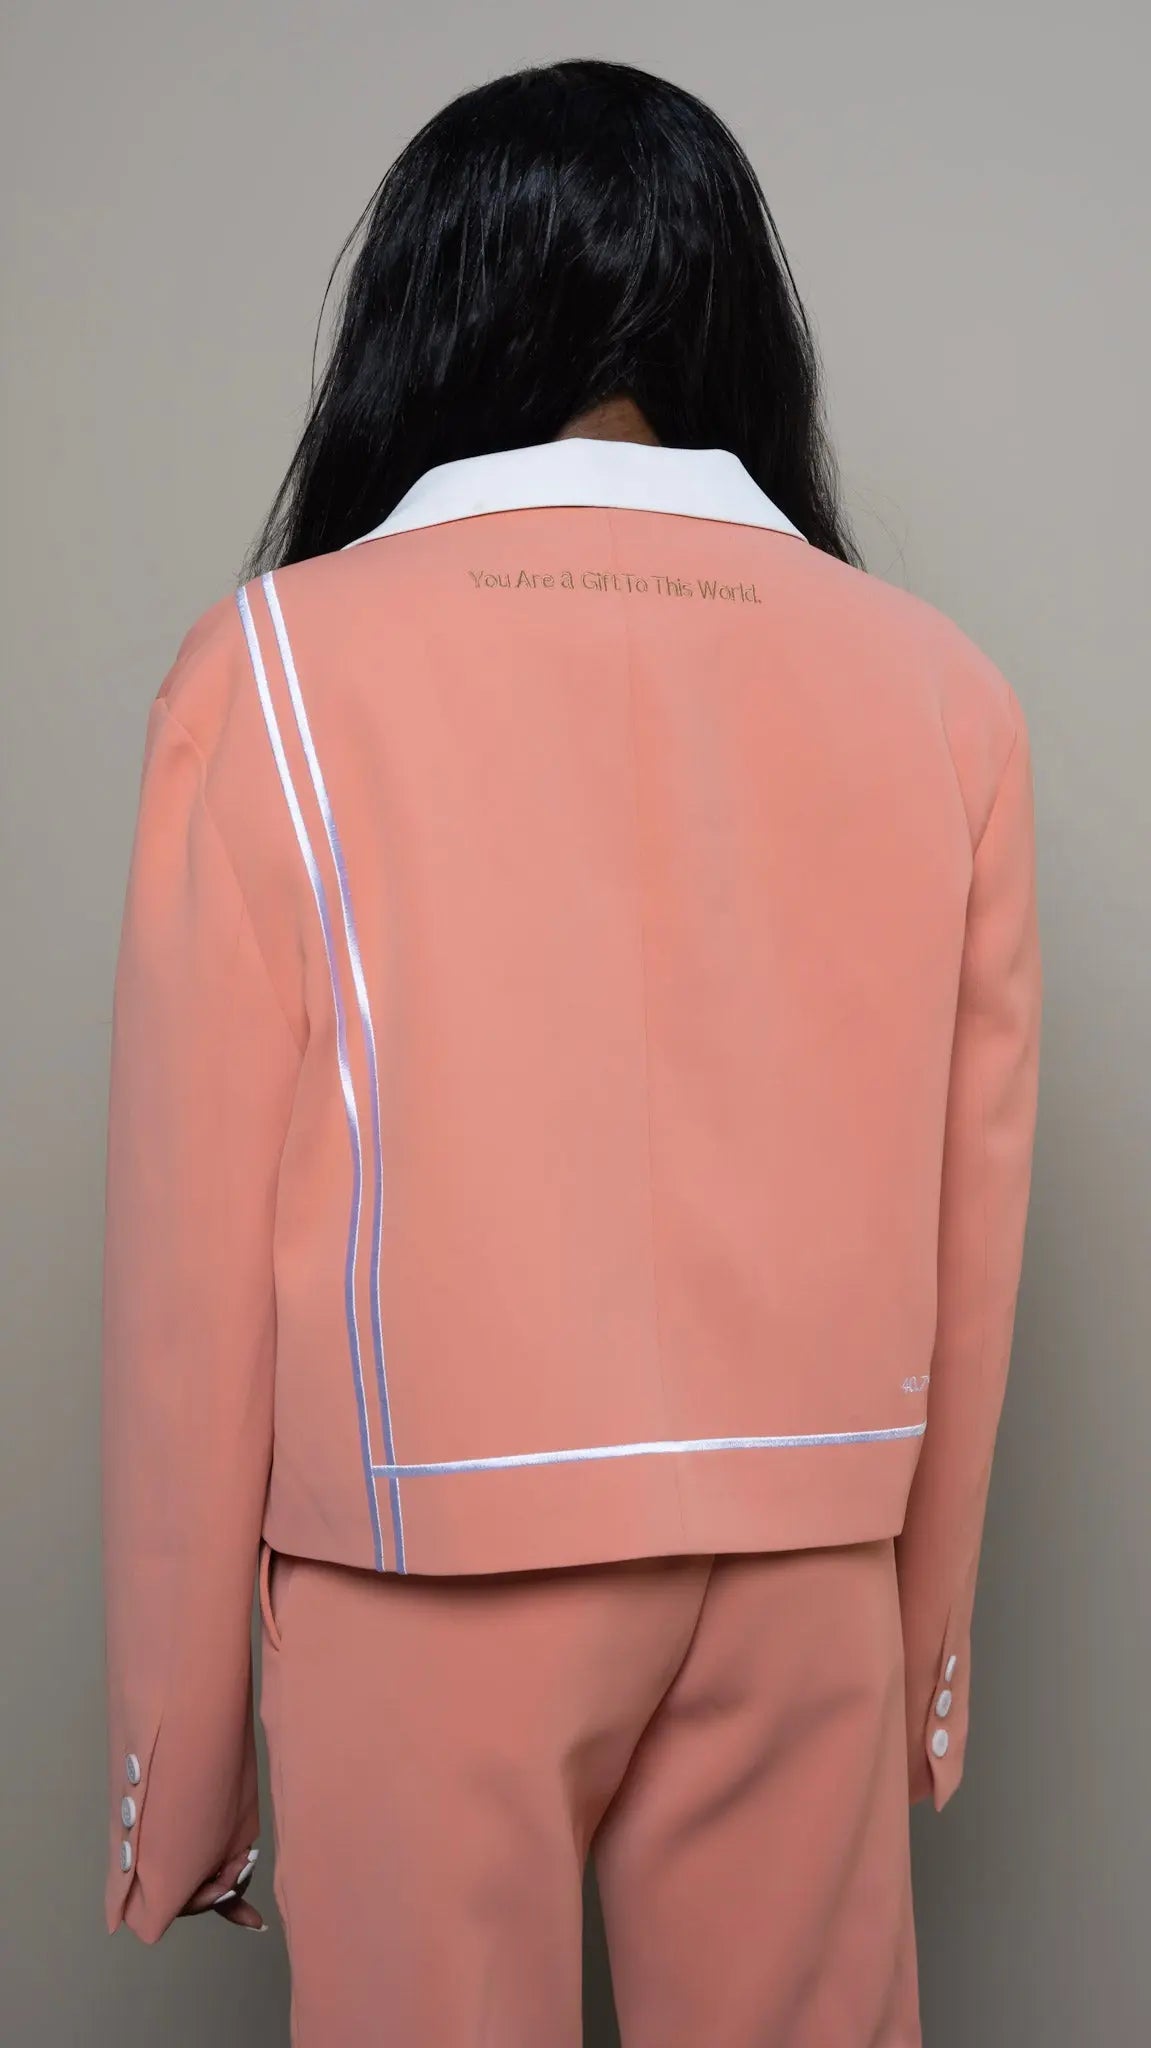 Photo of model in the Arius Juan Nature's Gift: Salmon Pink Cropped Blazer posing for product picture.